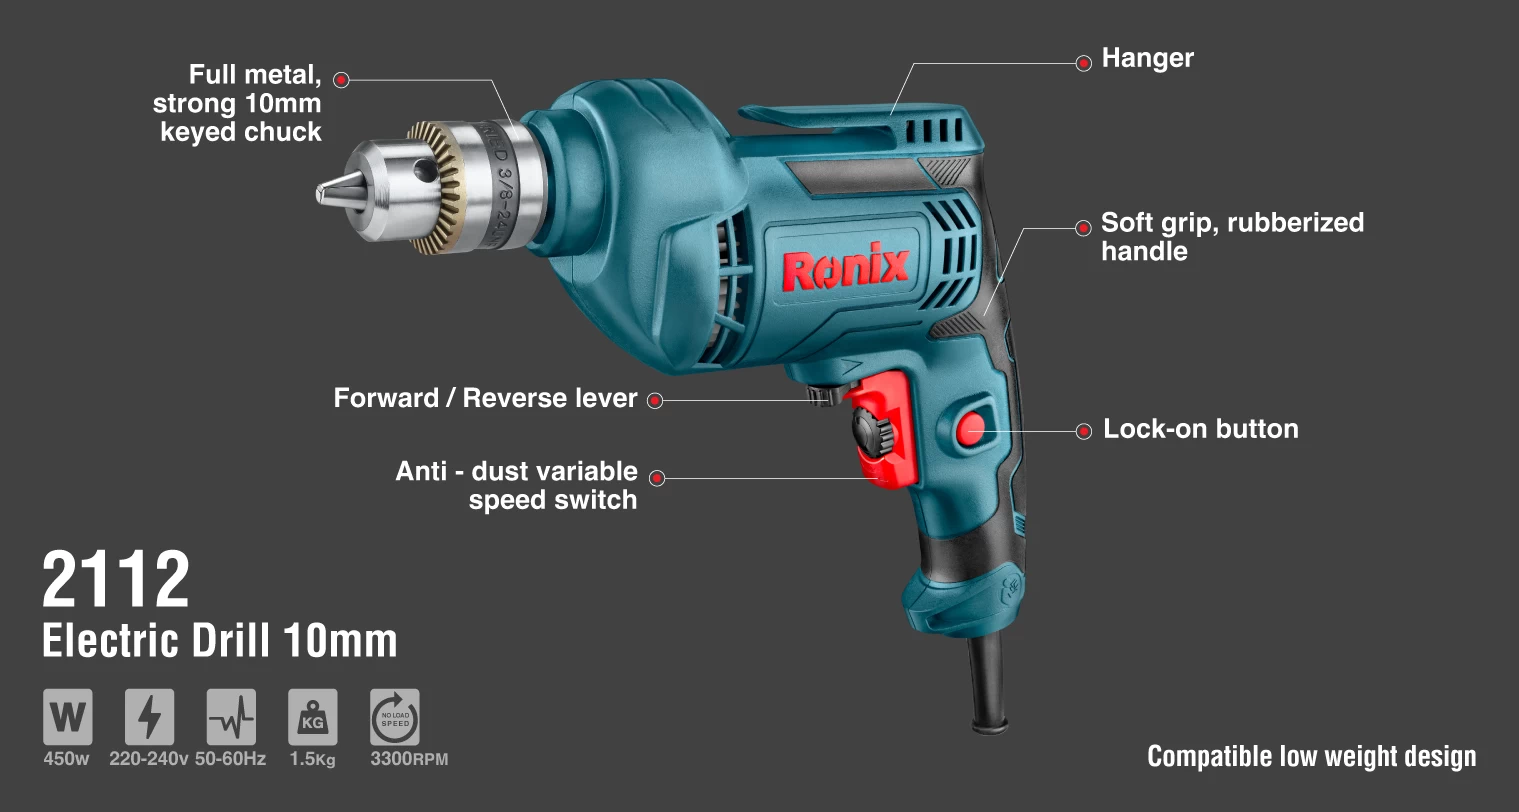 Electric Corded Drill, 450W, 220V, Keyed Chuck_details